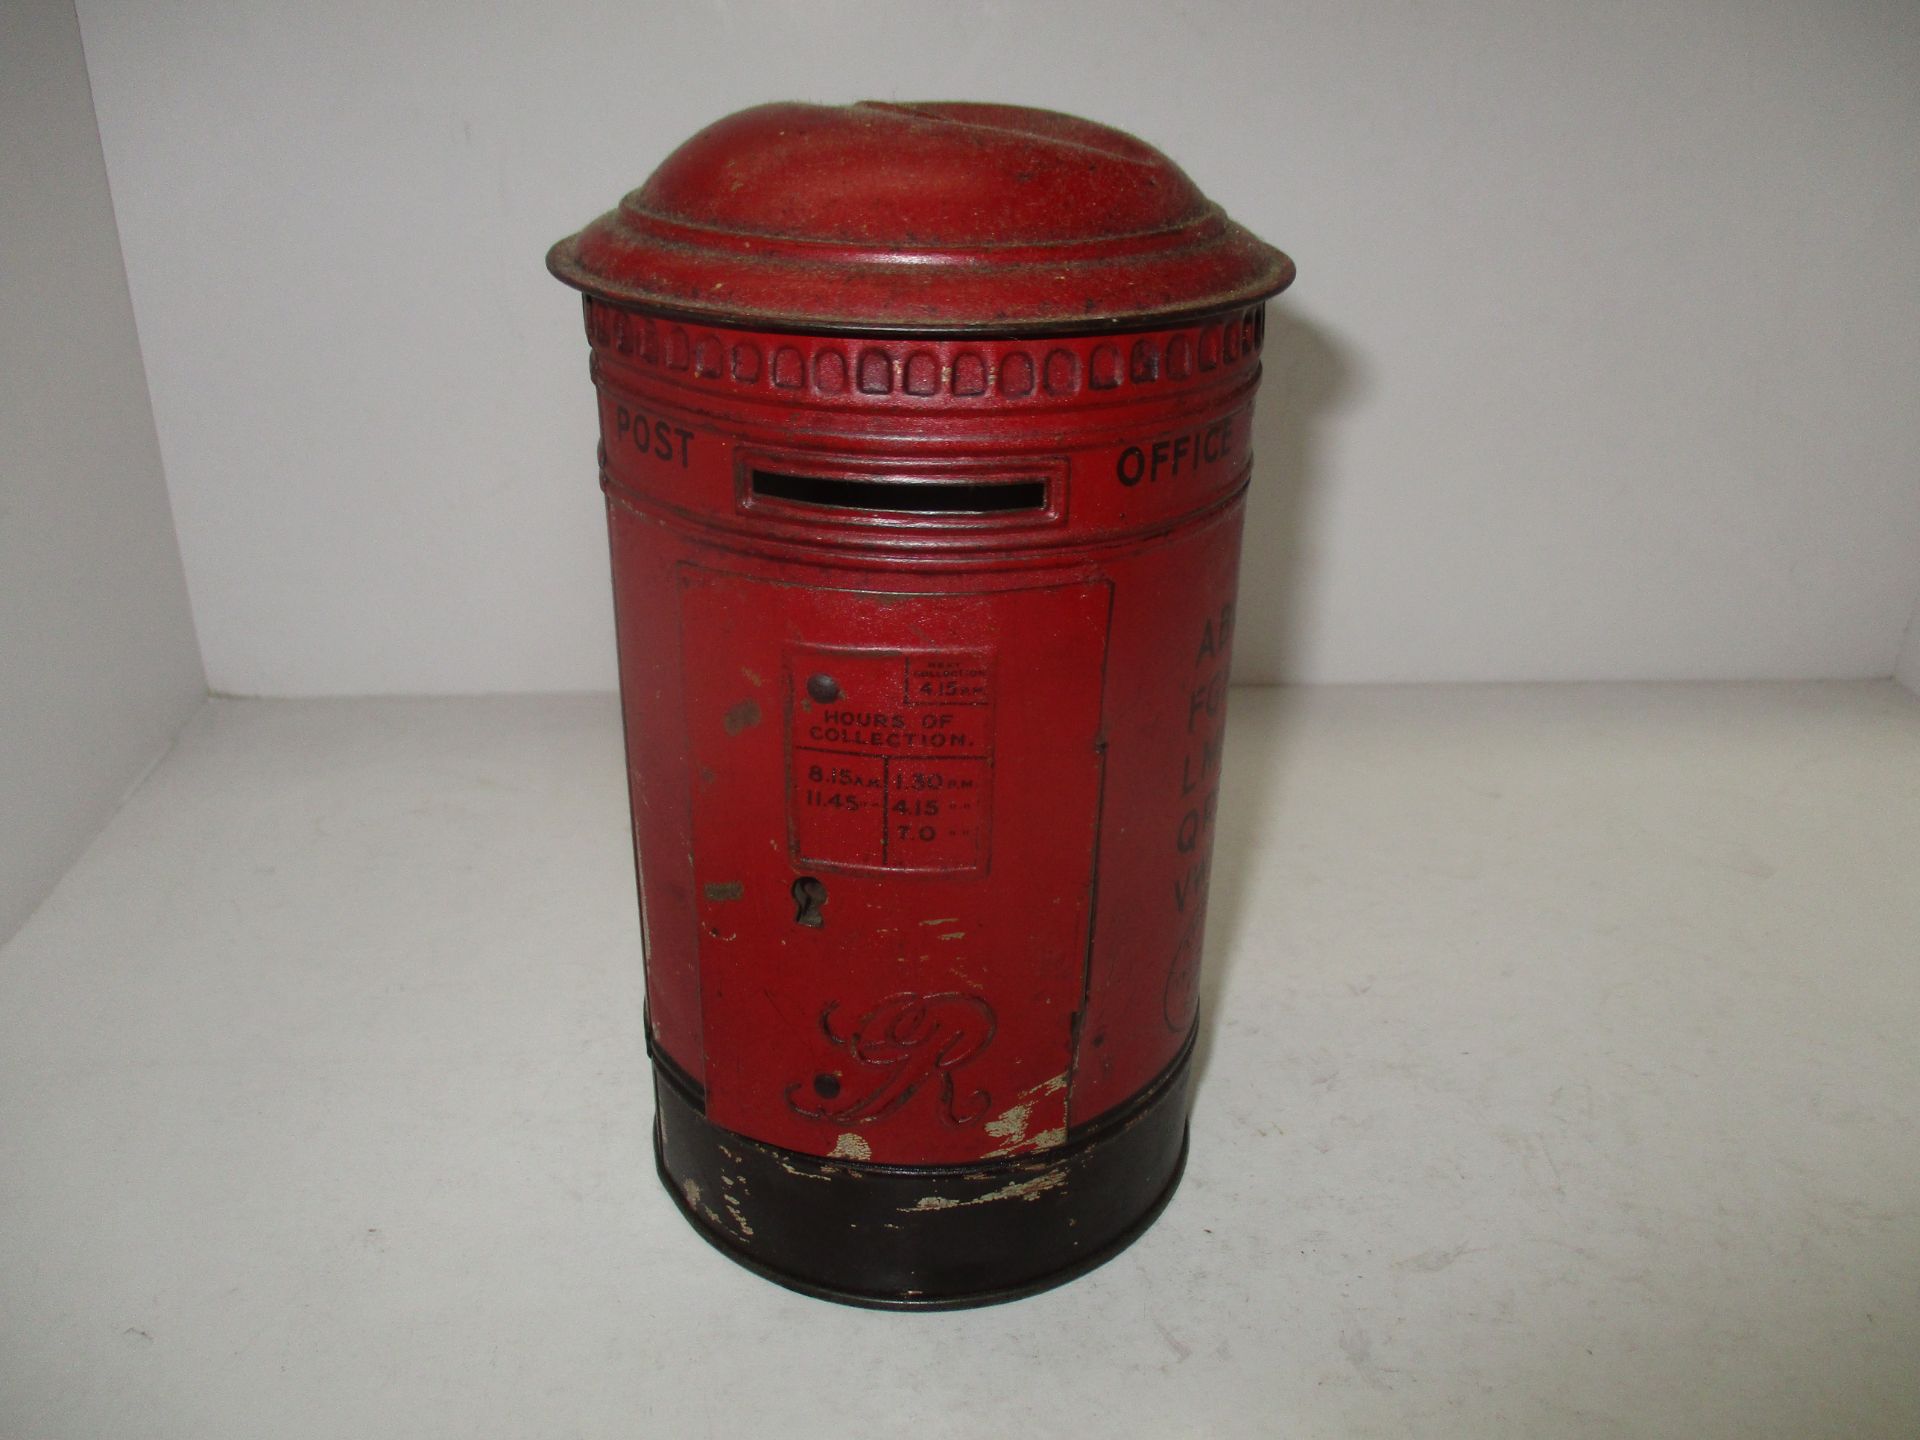 A Thornes Toffee GR Postbox tin, - Image 2 of 2